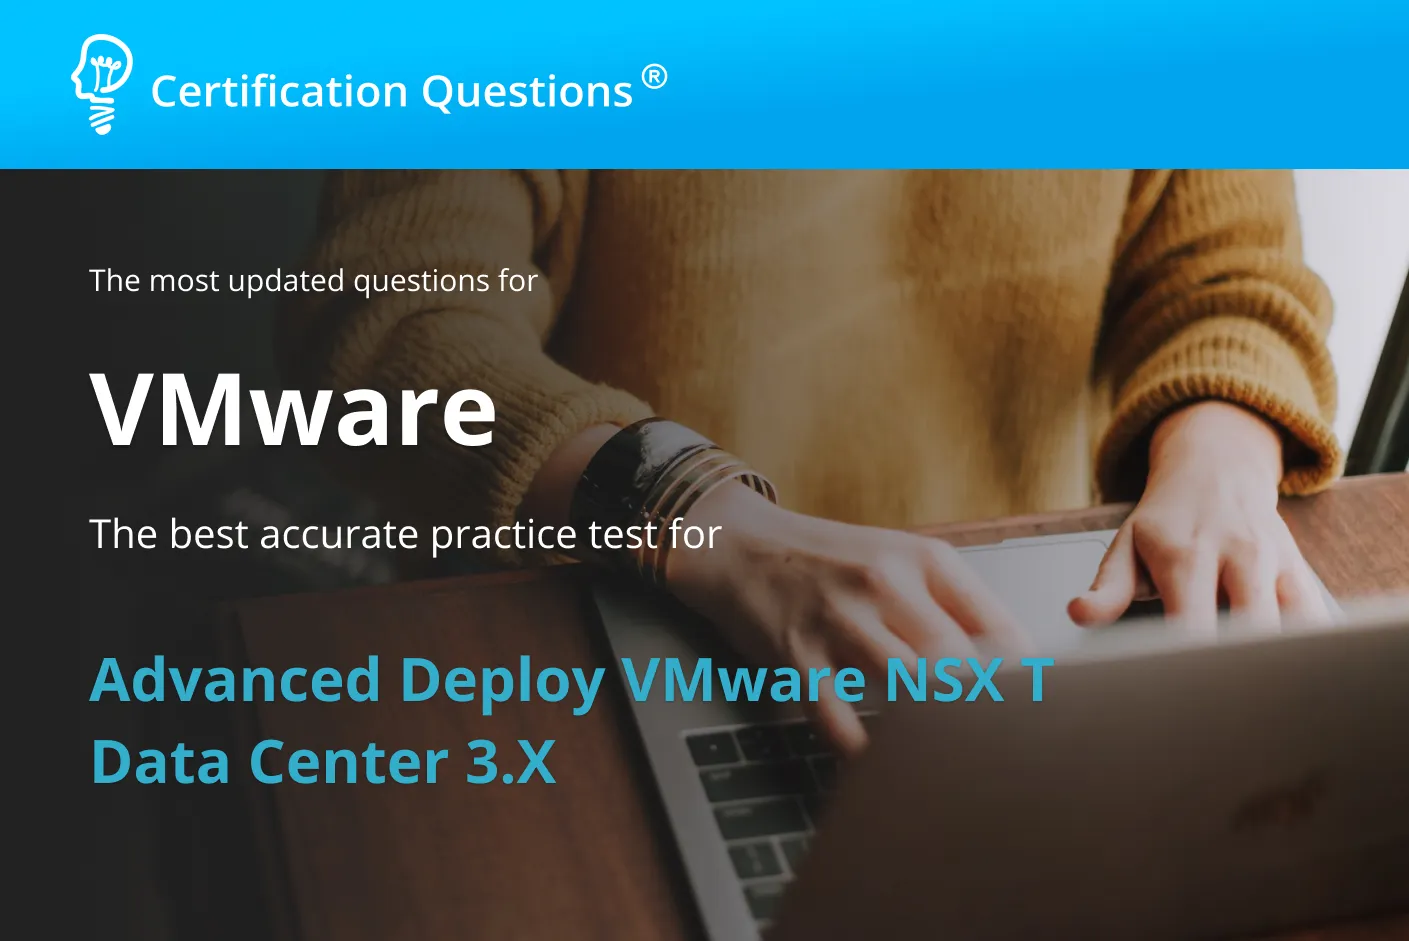 This guide is related to Advanced deploy VMWARE NSX-T data center questions